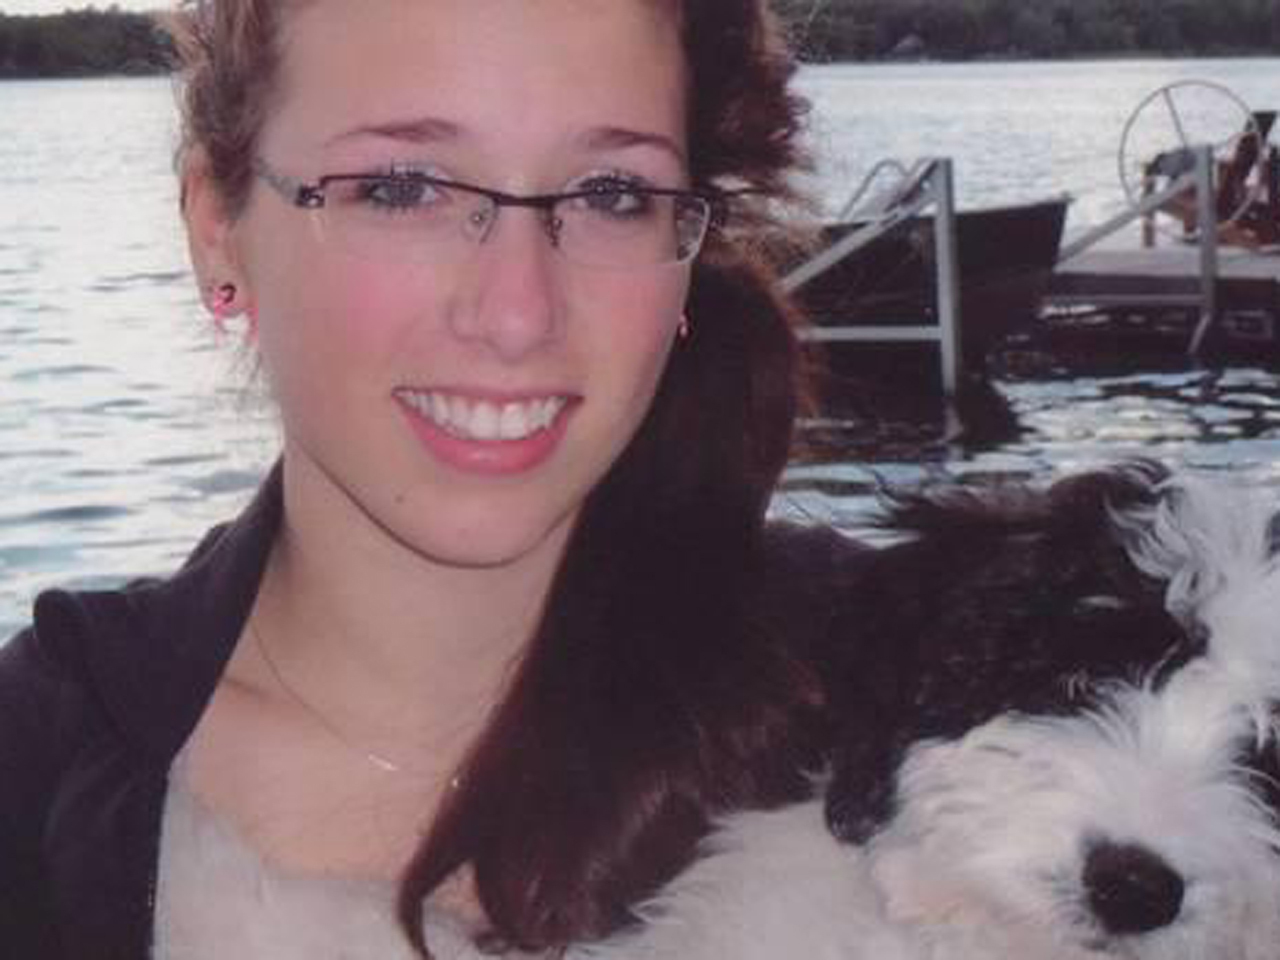 Russian Toddler Porn 3d - Rehtaeh Parsons Update: Teens facing child porn charges in ...